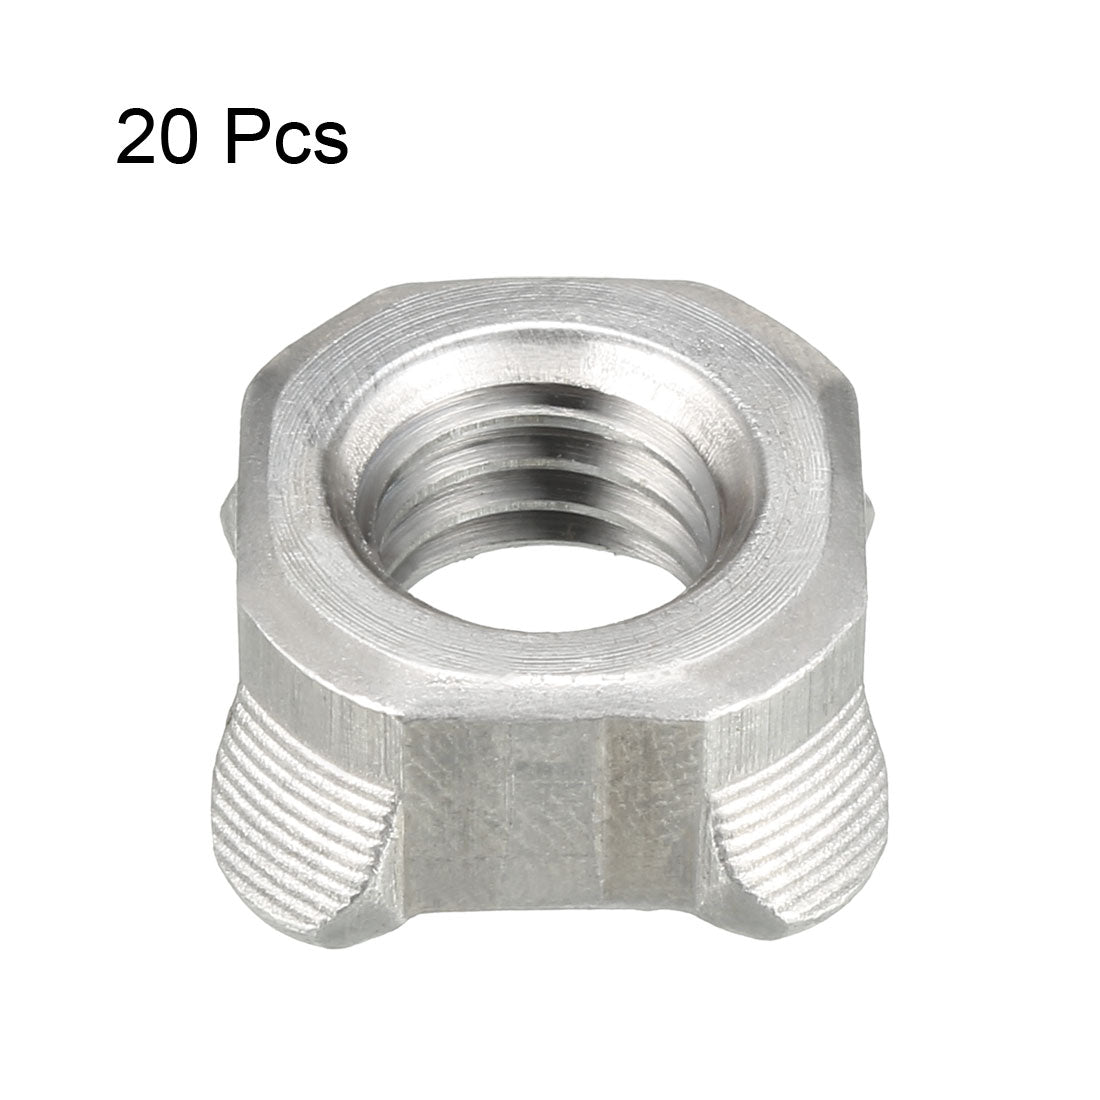 Uxcell Uxcell Weld Nuts,M10 Square UNC Carbon Steel Machine Screw Silver 20Pcs